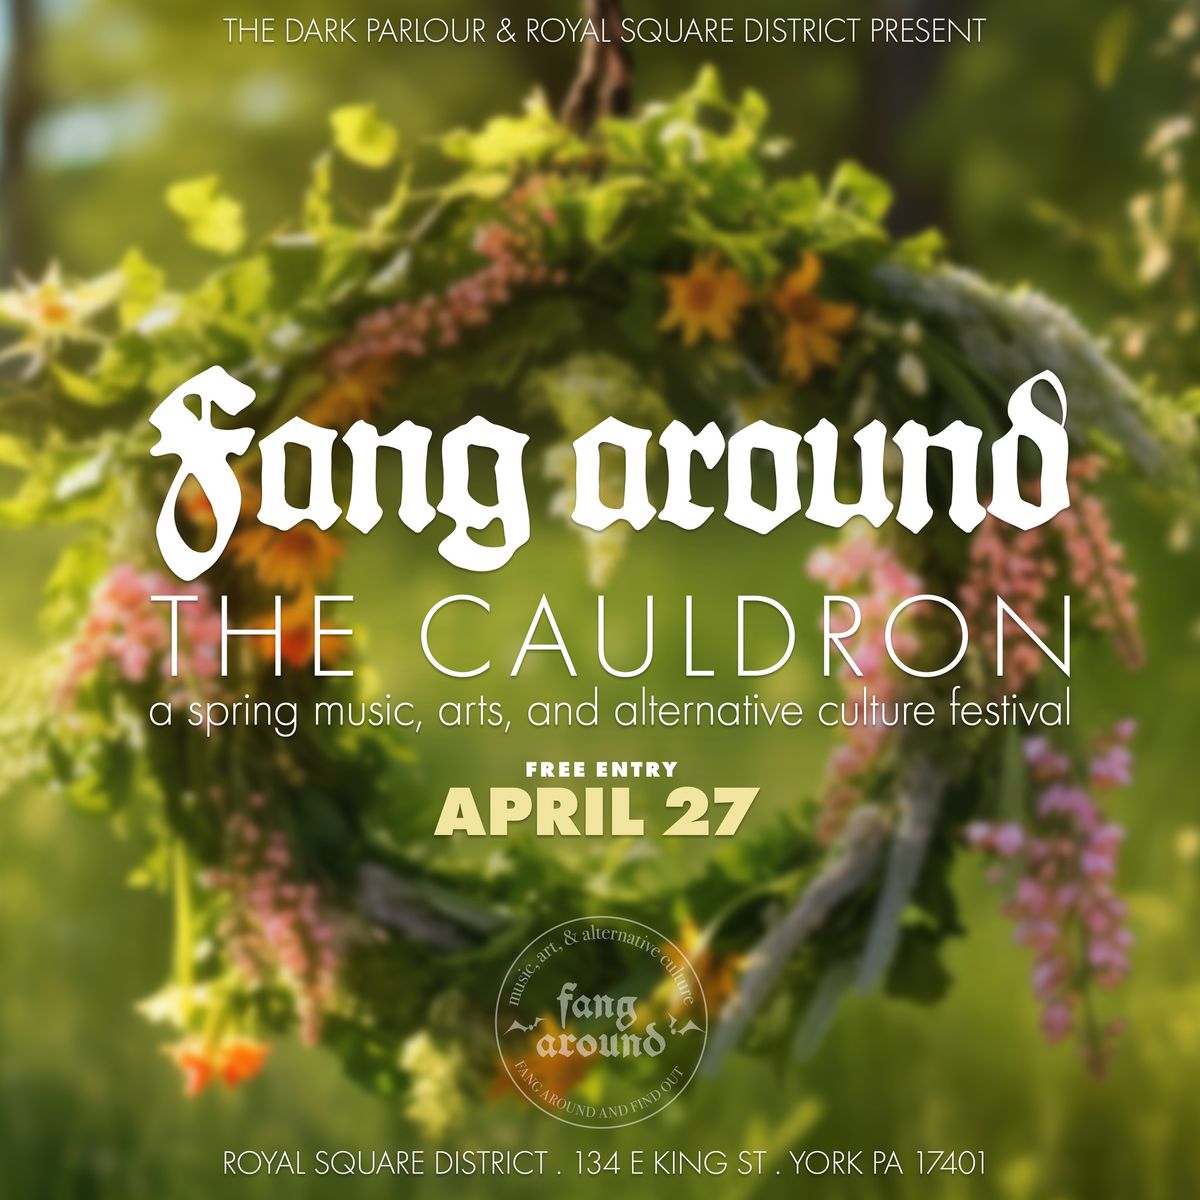 Fang Around The Cauldron - A Spring Music, Arts, and Alternative Culture Festival